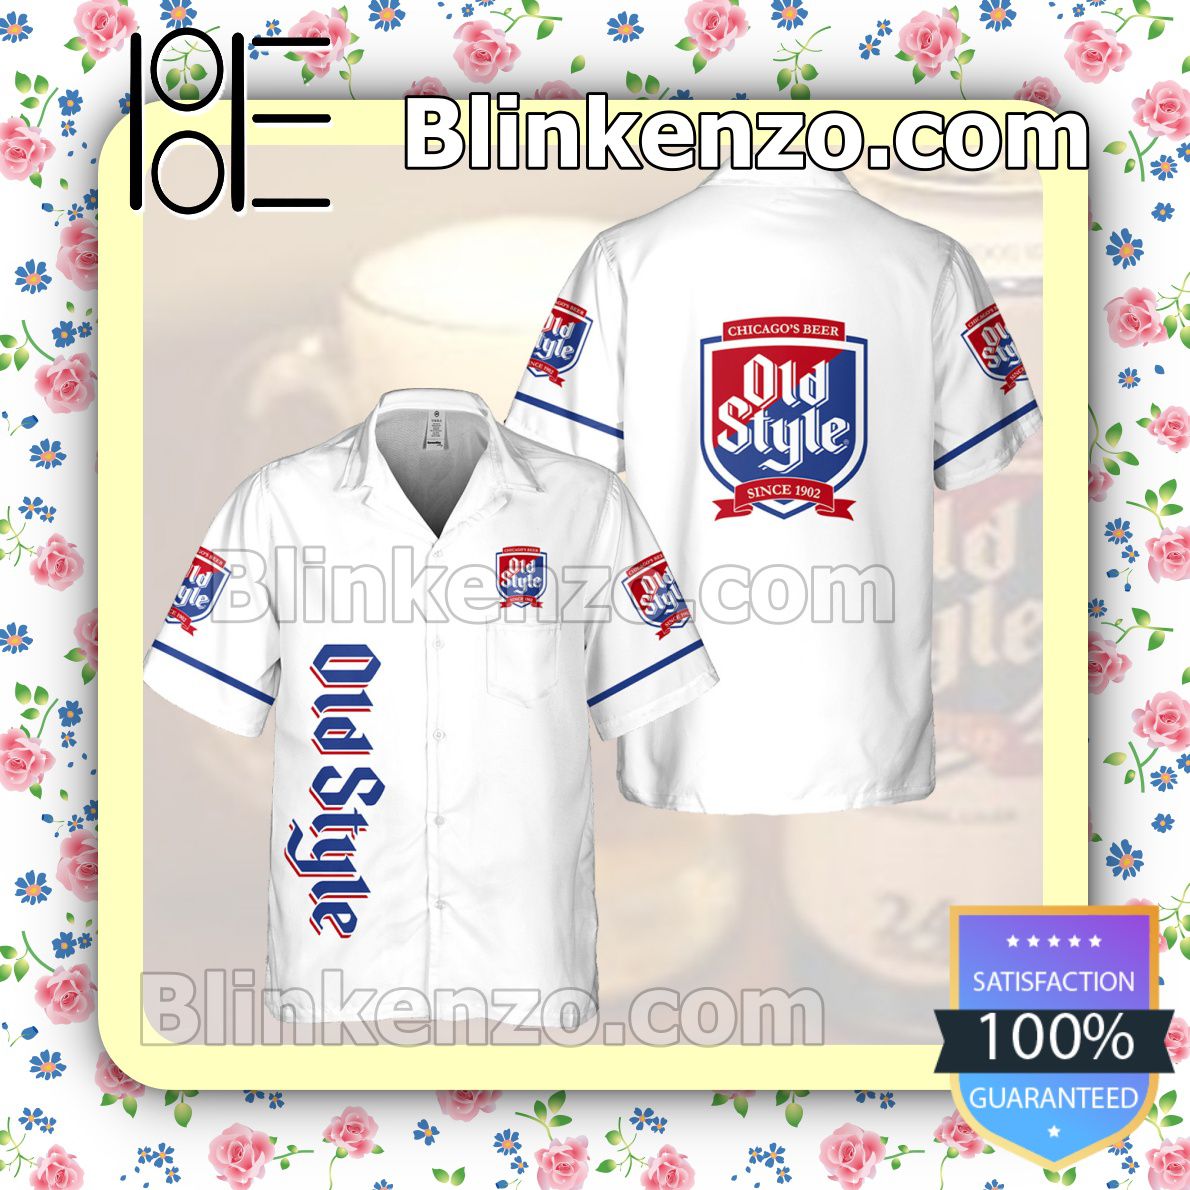 Old Style Chicago's Beers White Summer Hawaiian Shirt, Mens Shorts